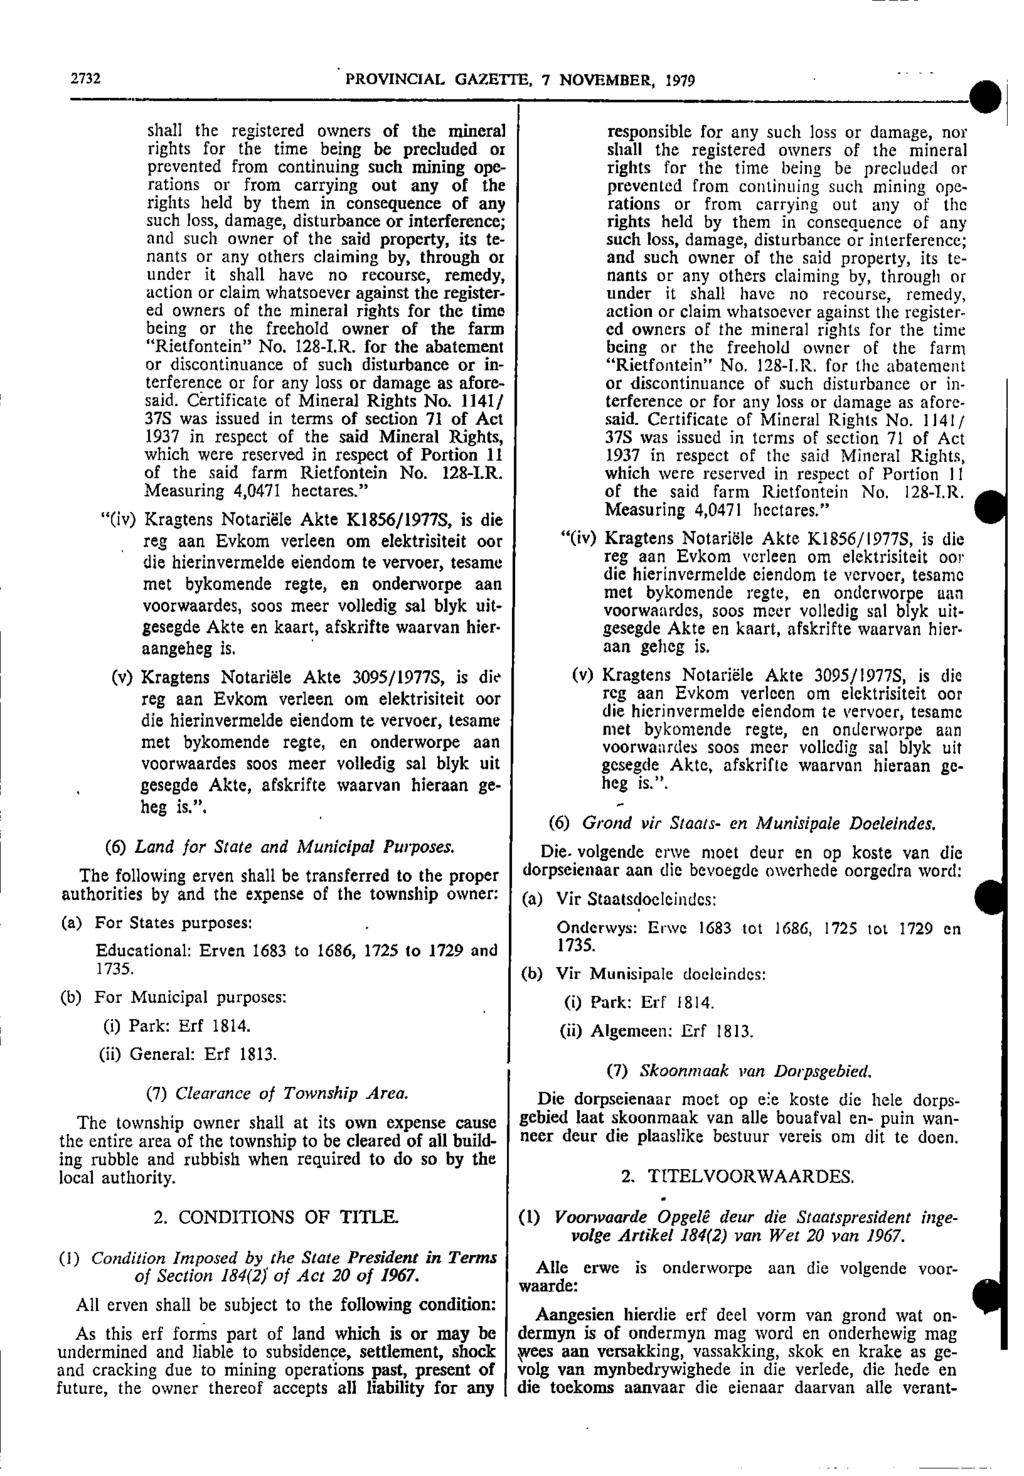 2732 PROVNCAL GAZETTE 7 NOVEMBER 1979 shall the registered owners of the mineral responsible for any such loss or damage nor rights for the time being be precluded or shall the registered owners of